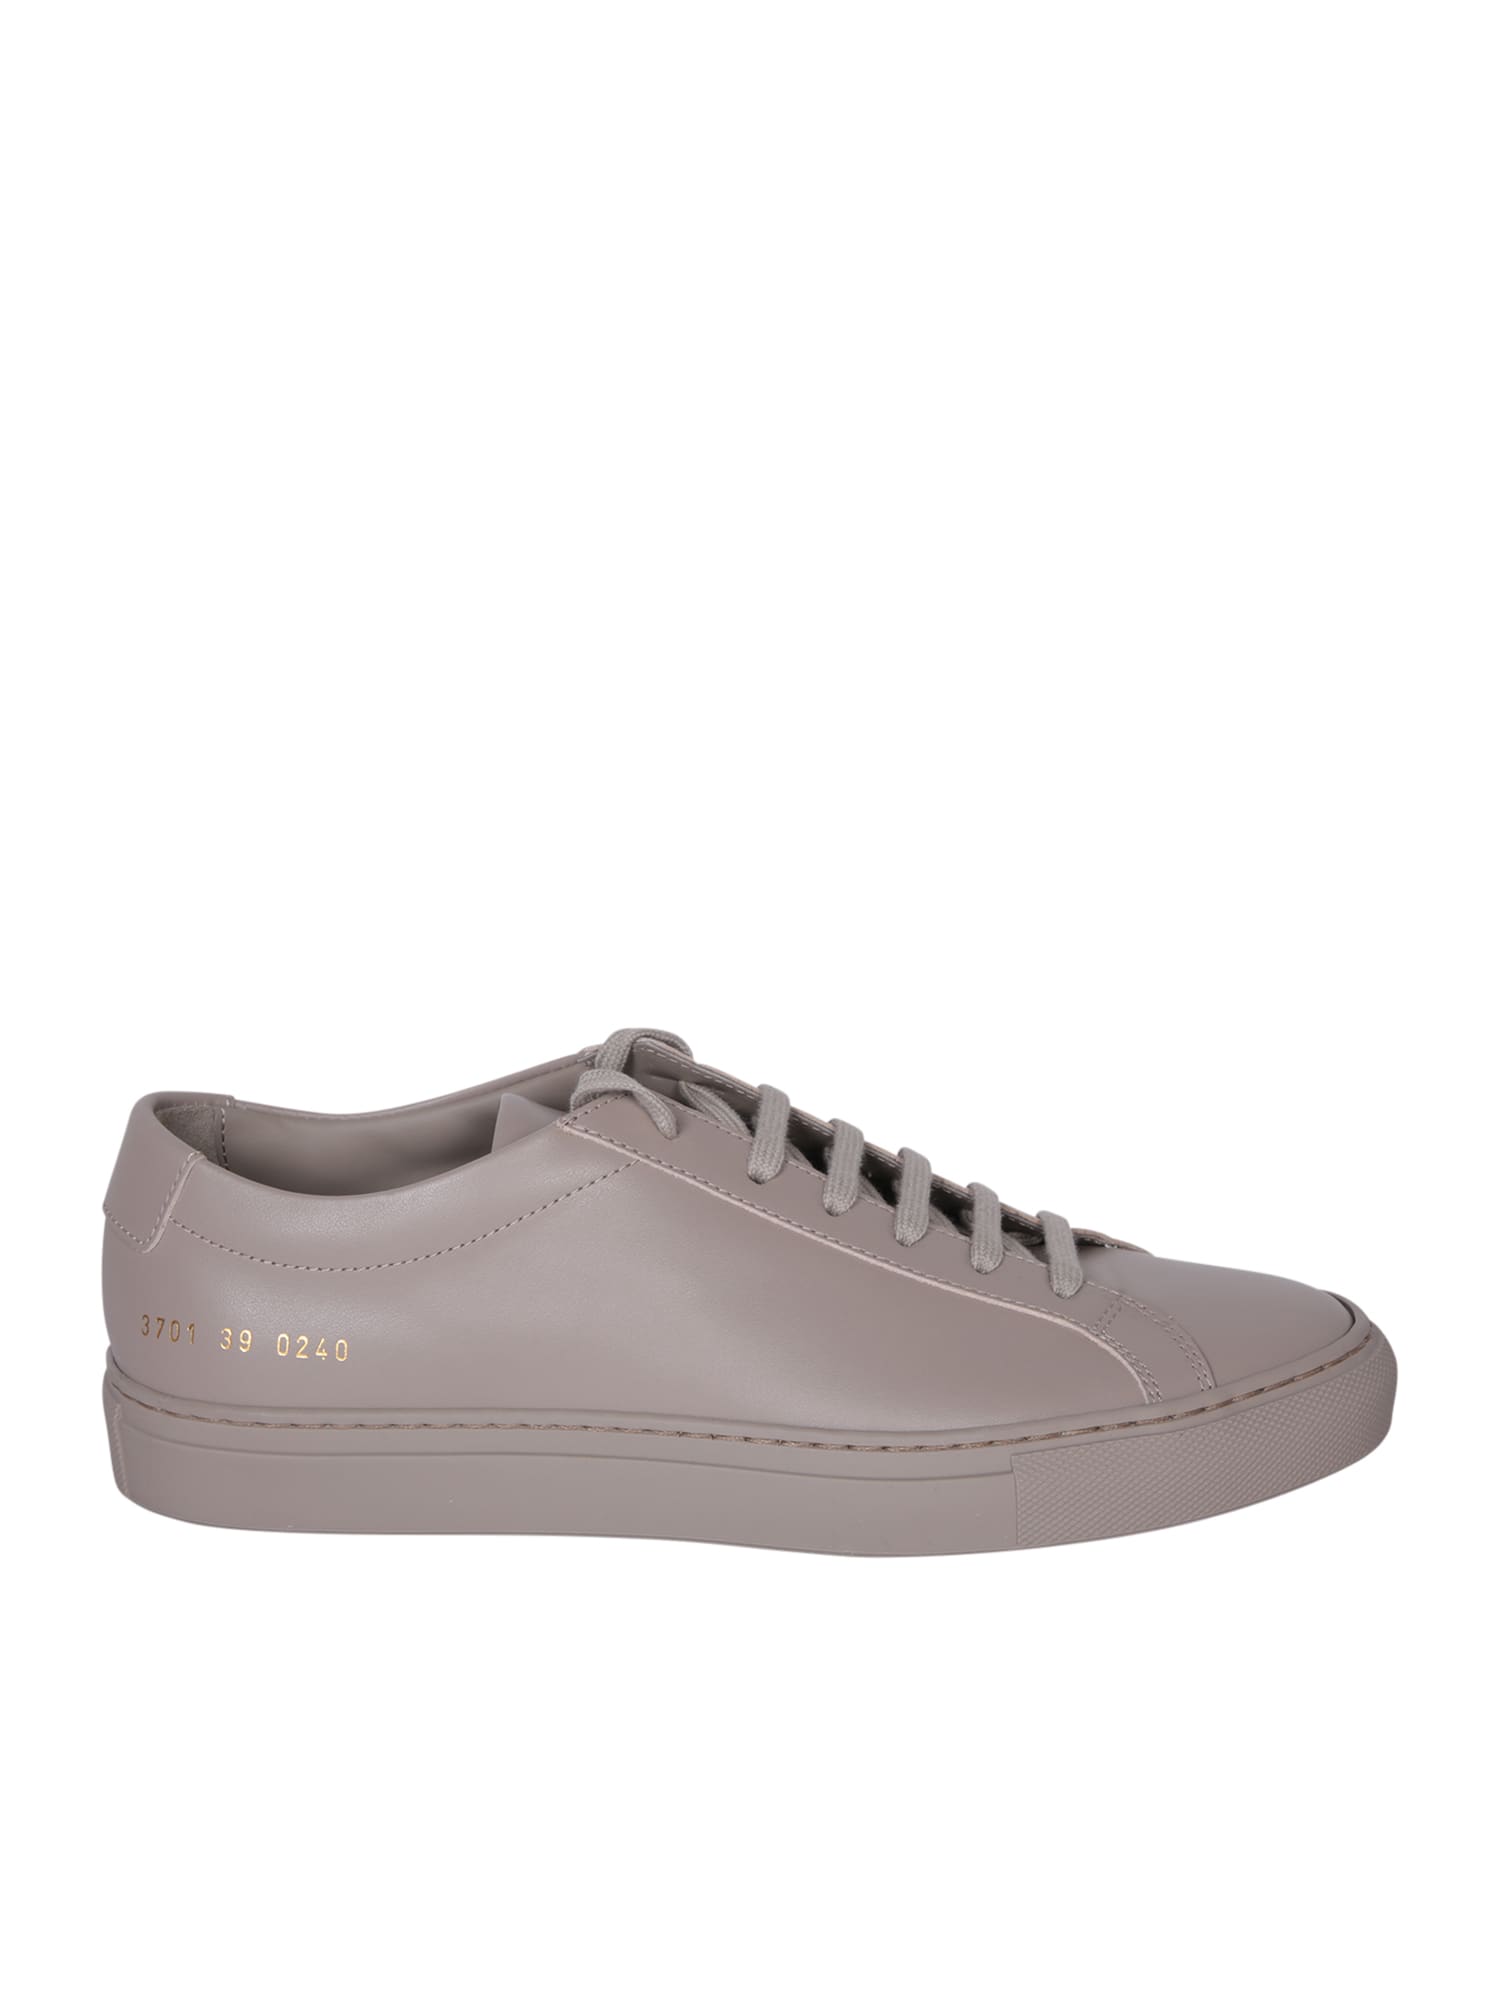 COMMON PROJECTS COMMON PROJECTS ACHILLE LOW GREY SNEAKERS